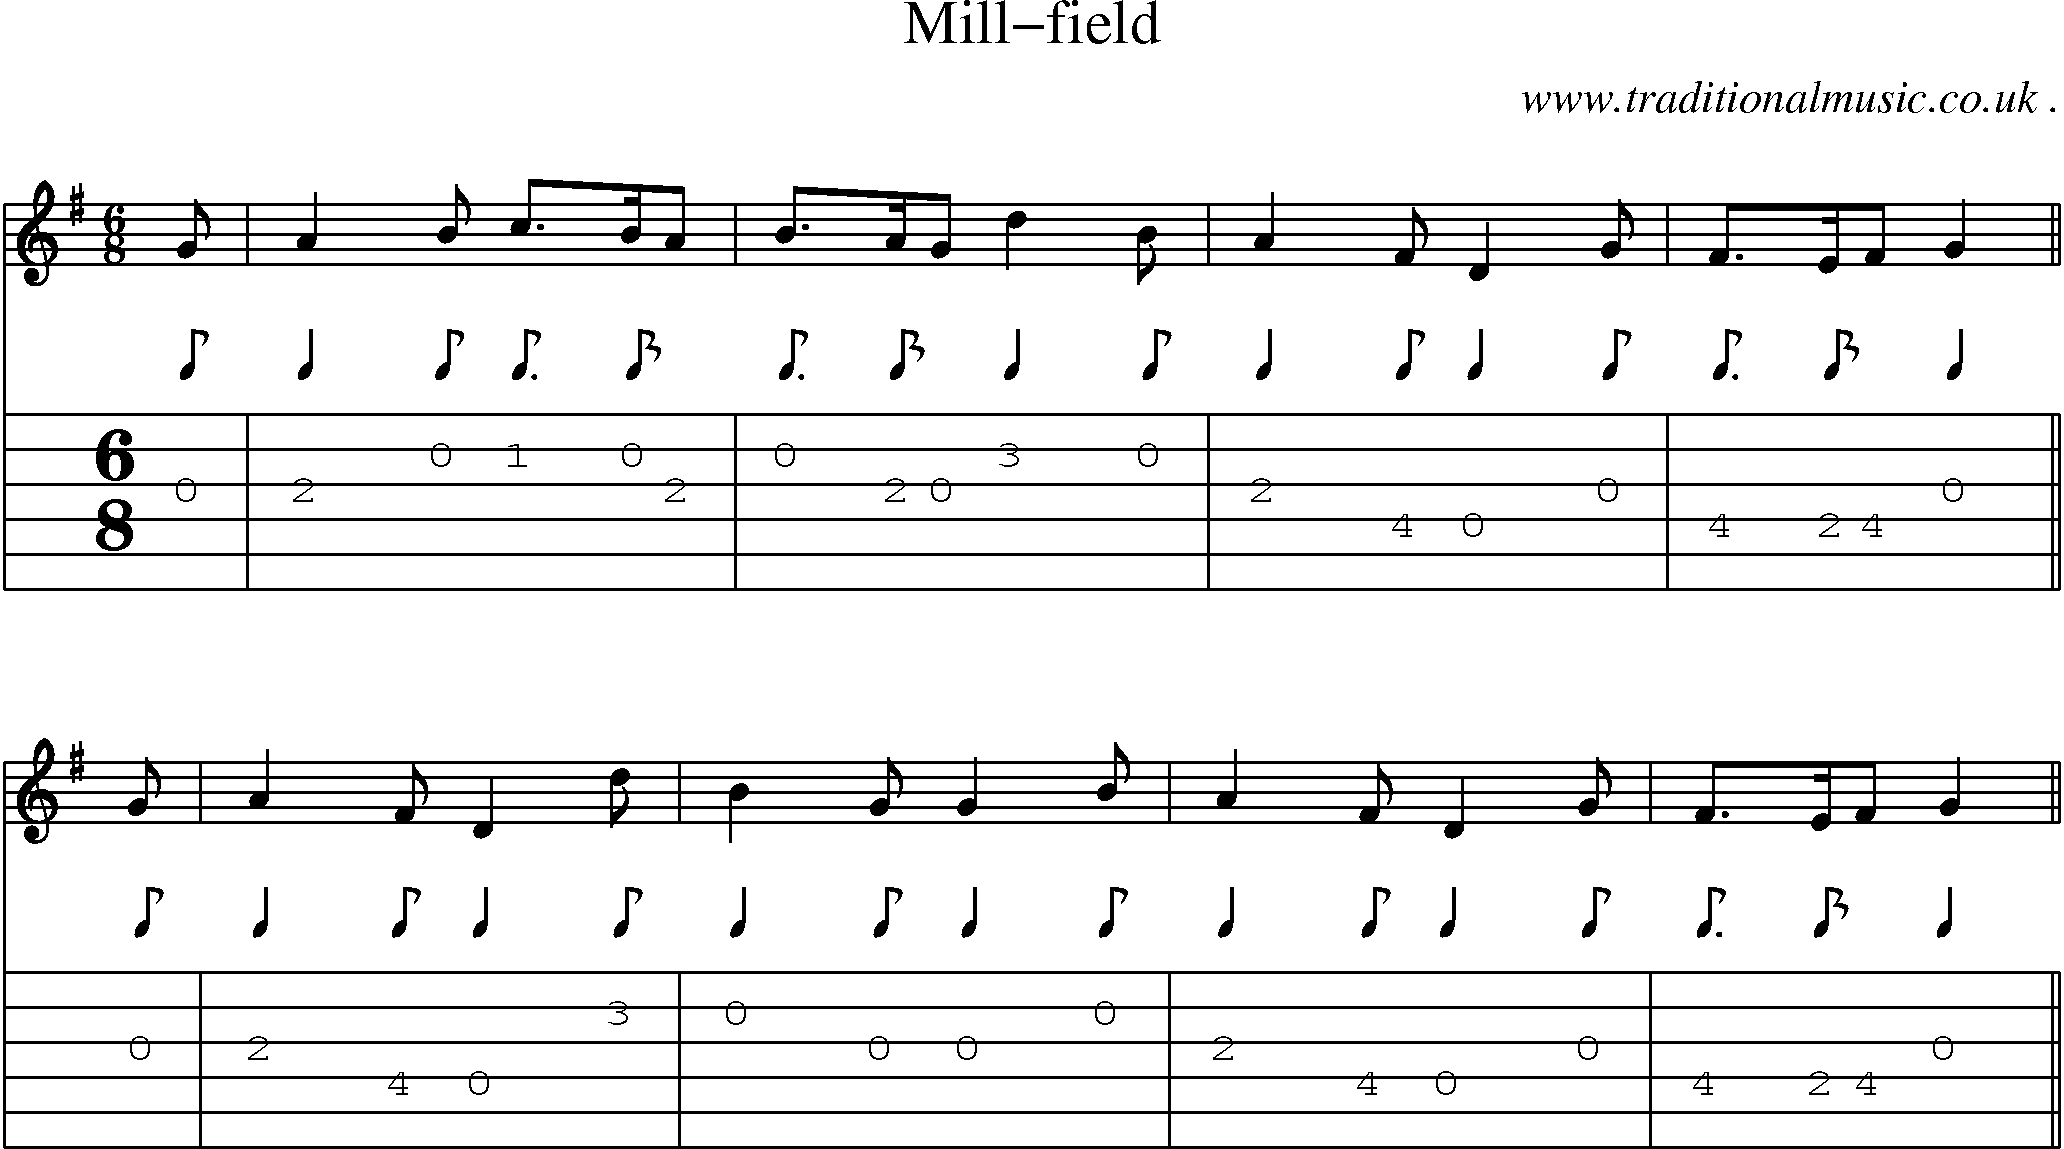 Sheet-Music and Guitar Tabs for Mill-field